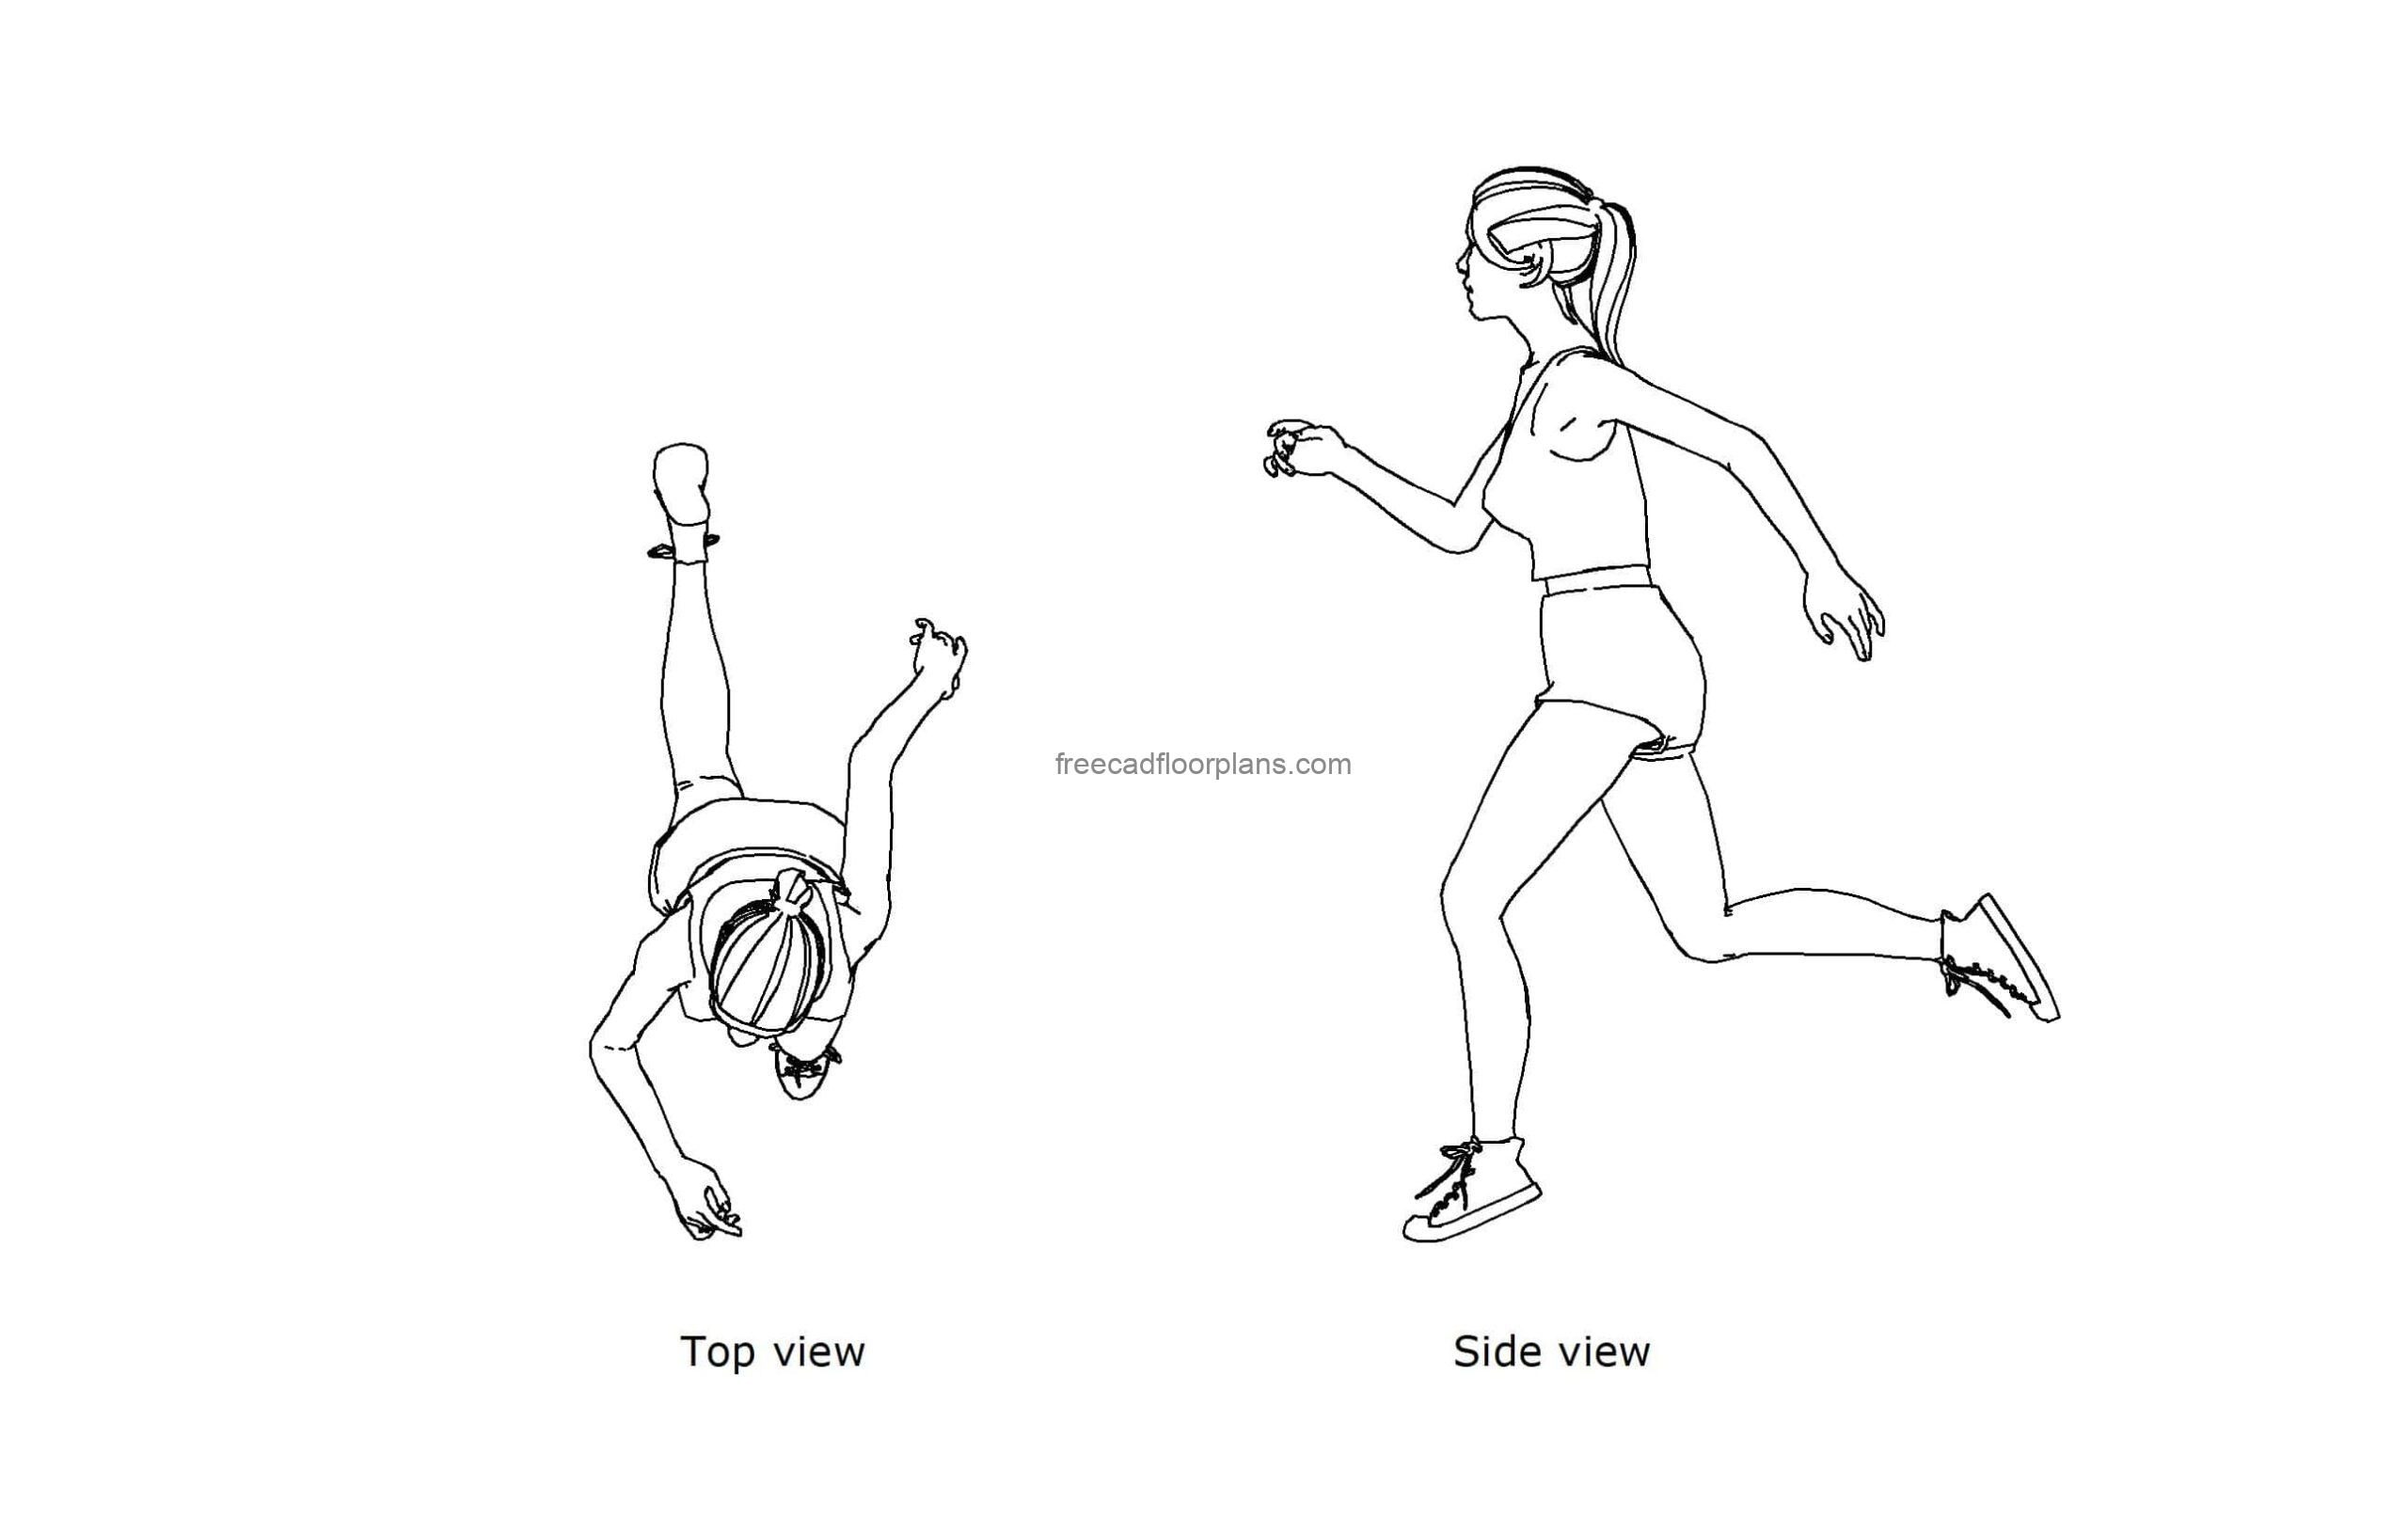 autocad drawing of a woman joggin, plan and elevation 2d views, dwg file free for download